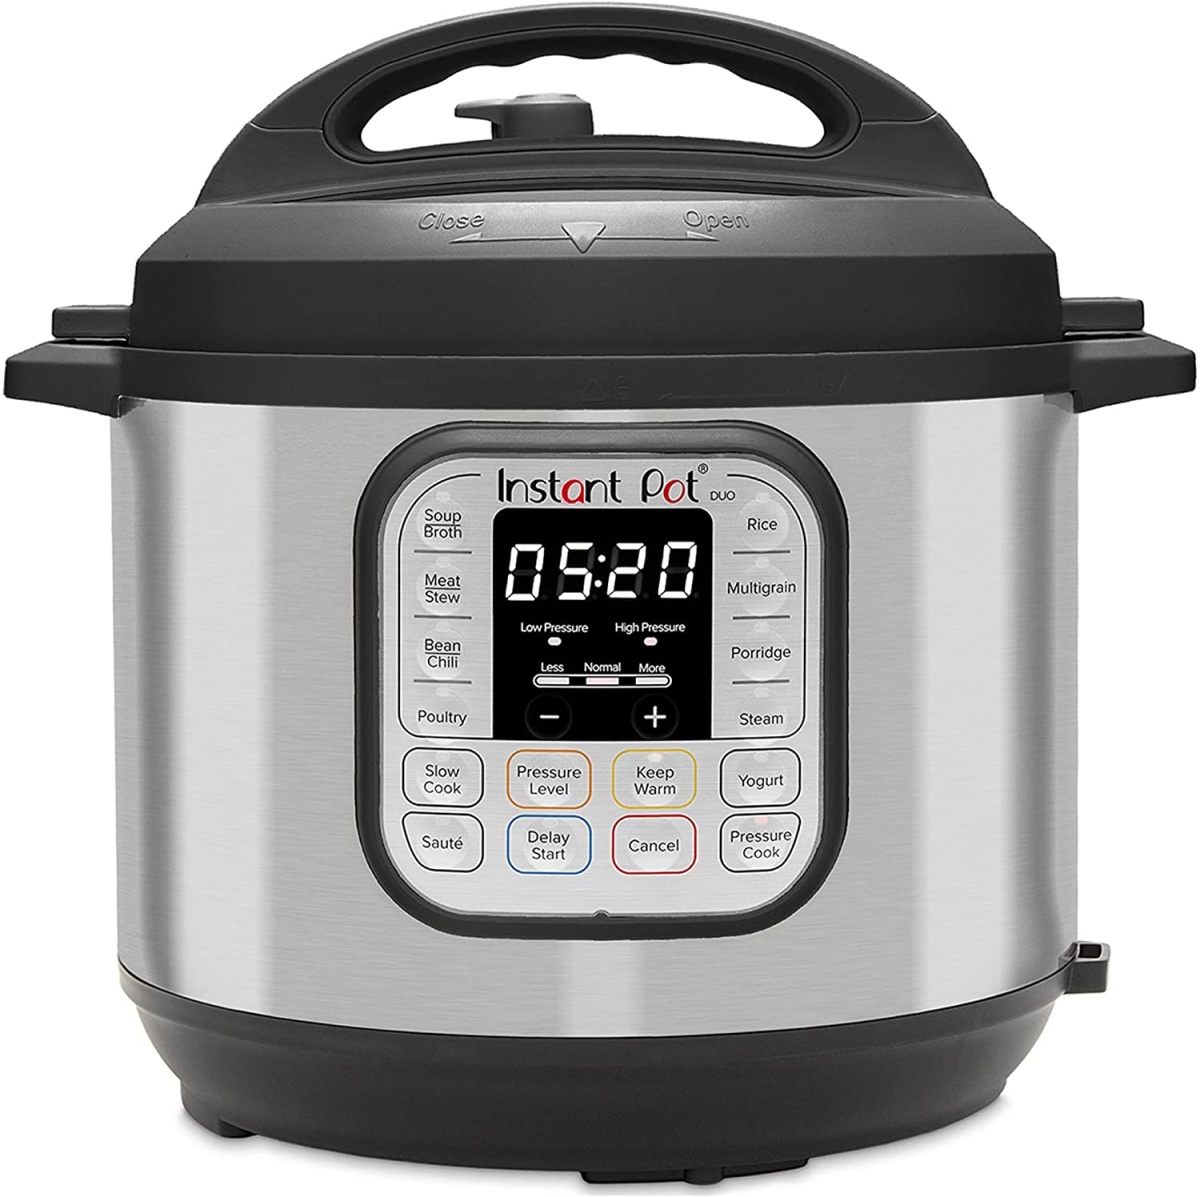 West Bend 5 Quart Oblong Slow Cooker With Travel Tote, Cookers & Steamers, Furniture & Appliances